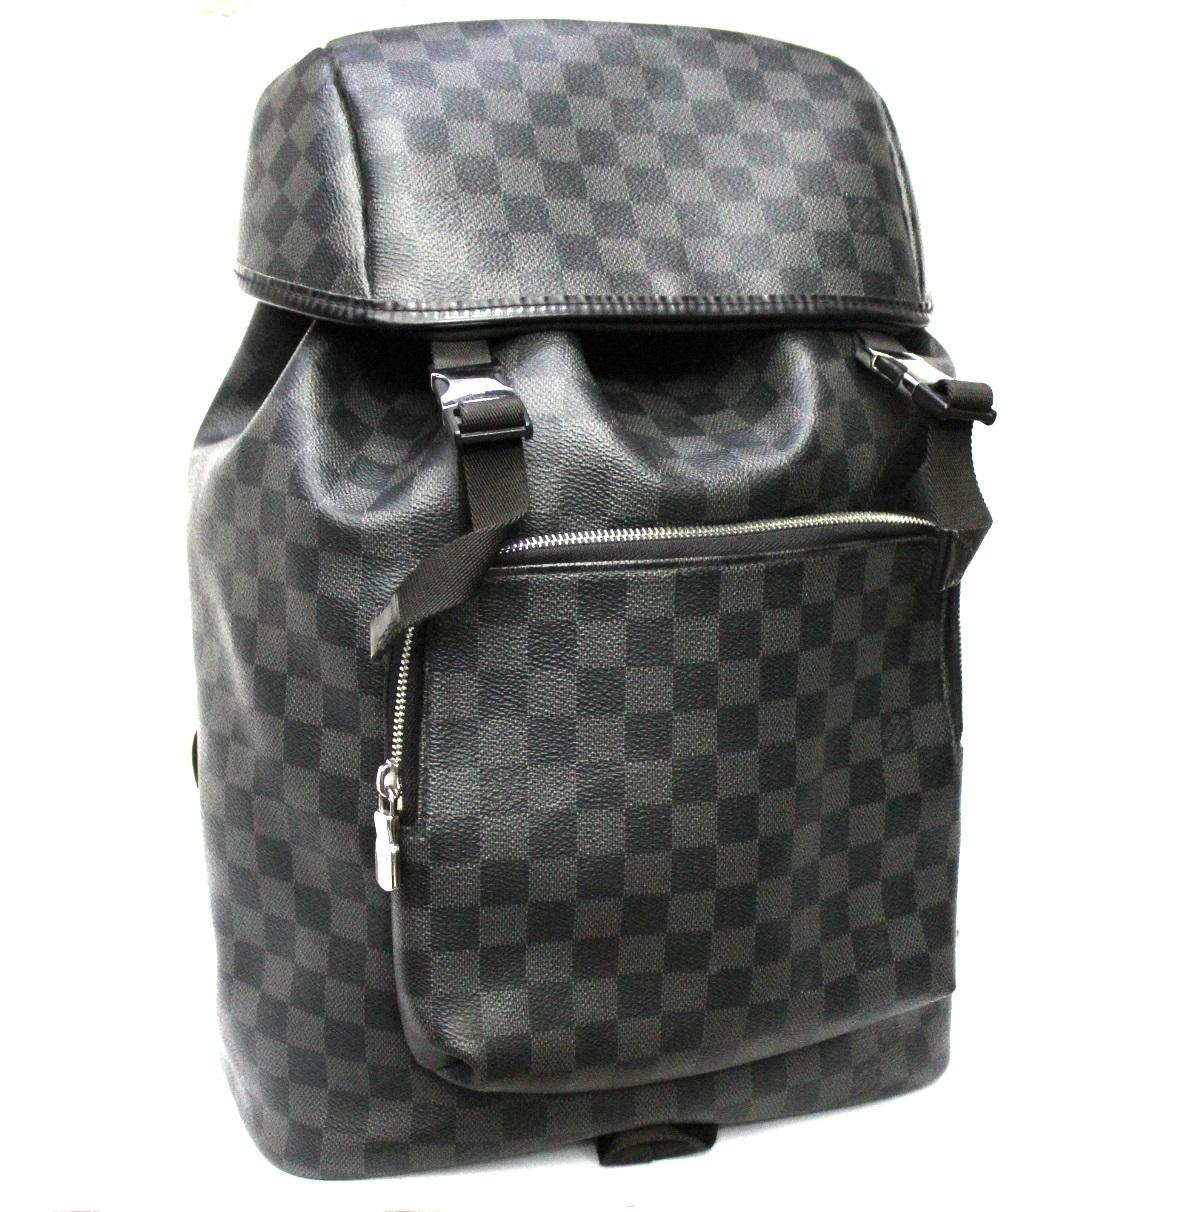 Louis Vuitton Zack model backpack made of Damier Graphite.

Equipped with double hook closure, very large inside. Equipped with a pocket on the front.

The backpack is in excellent condition.